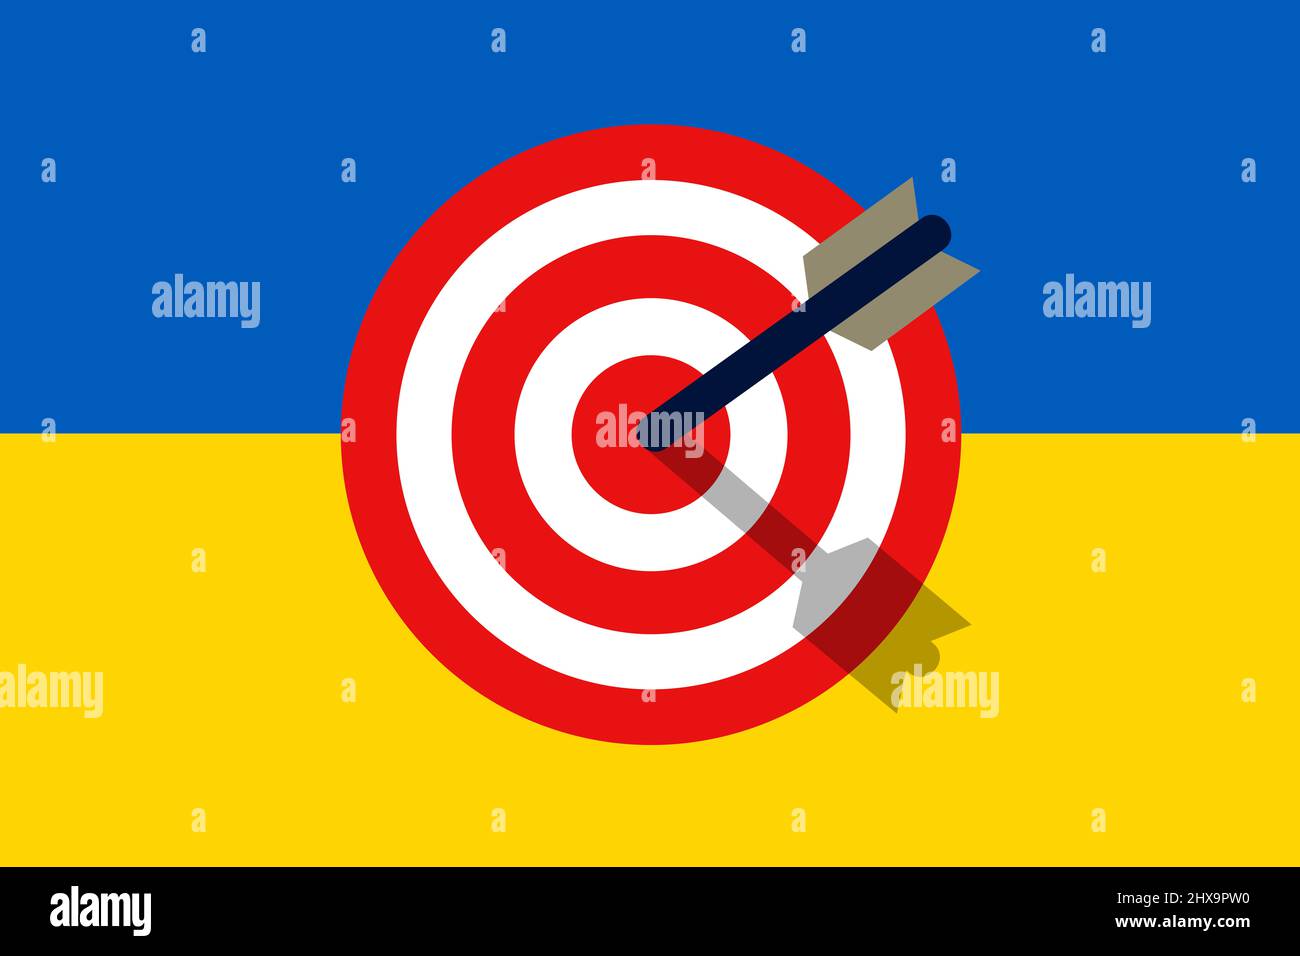 National flag and target as metaphor - Ukraine and  being under attack, assault and aggressive aggression. Flag with target. Vector illustration. Stock Photo